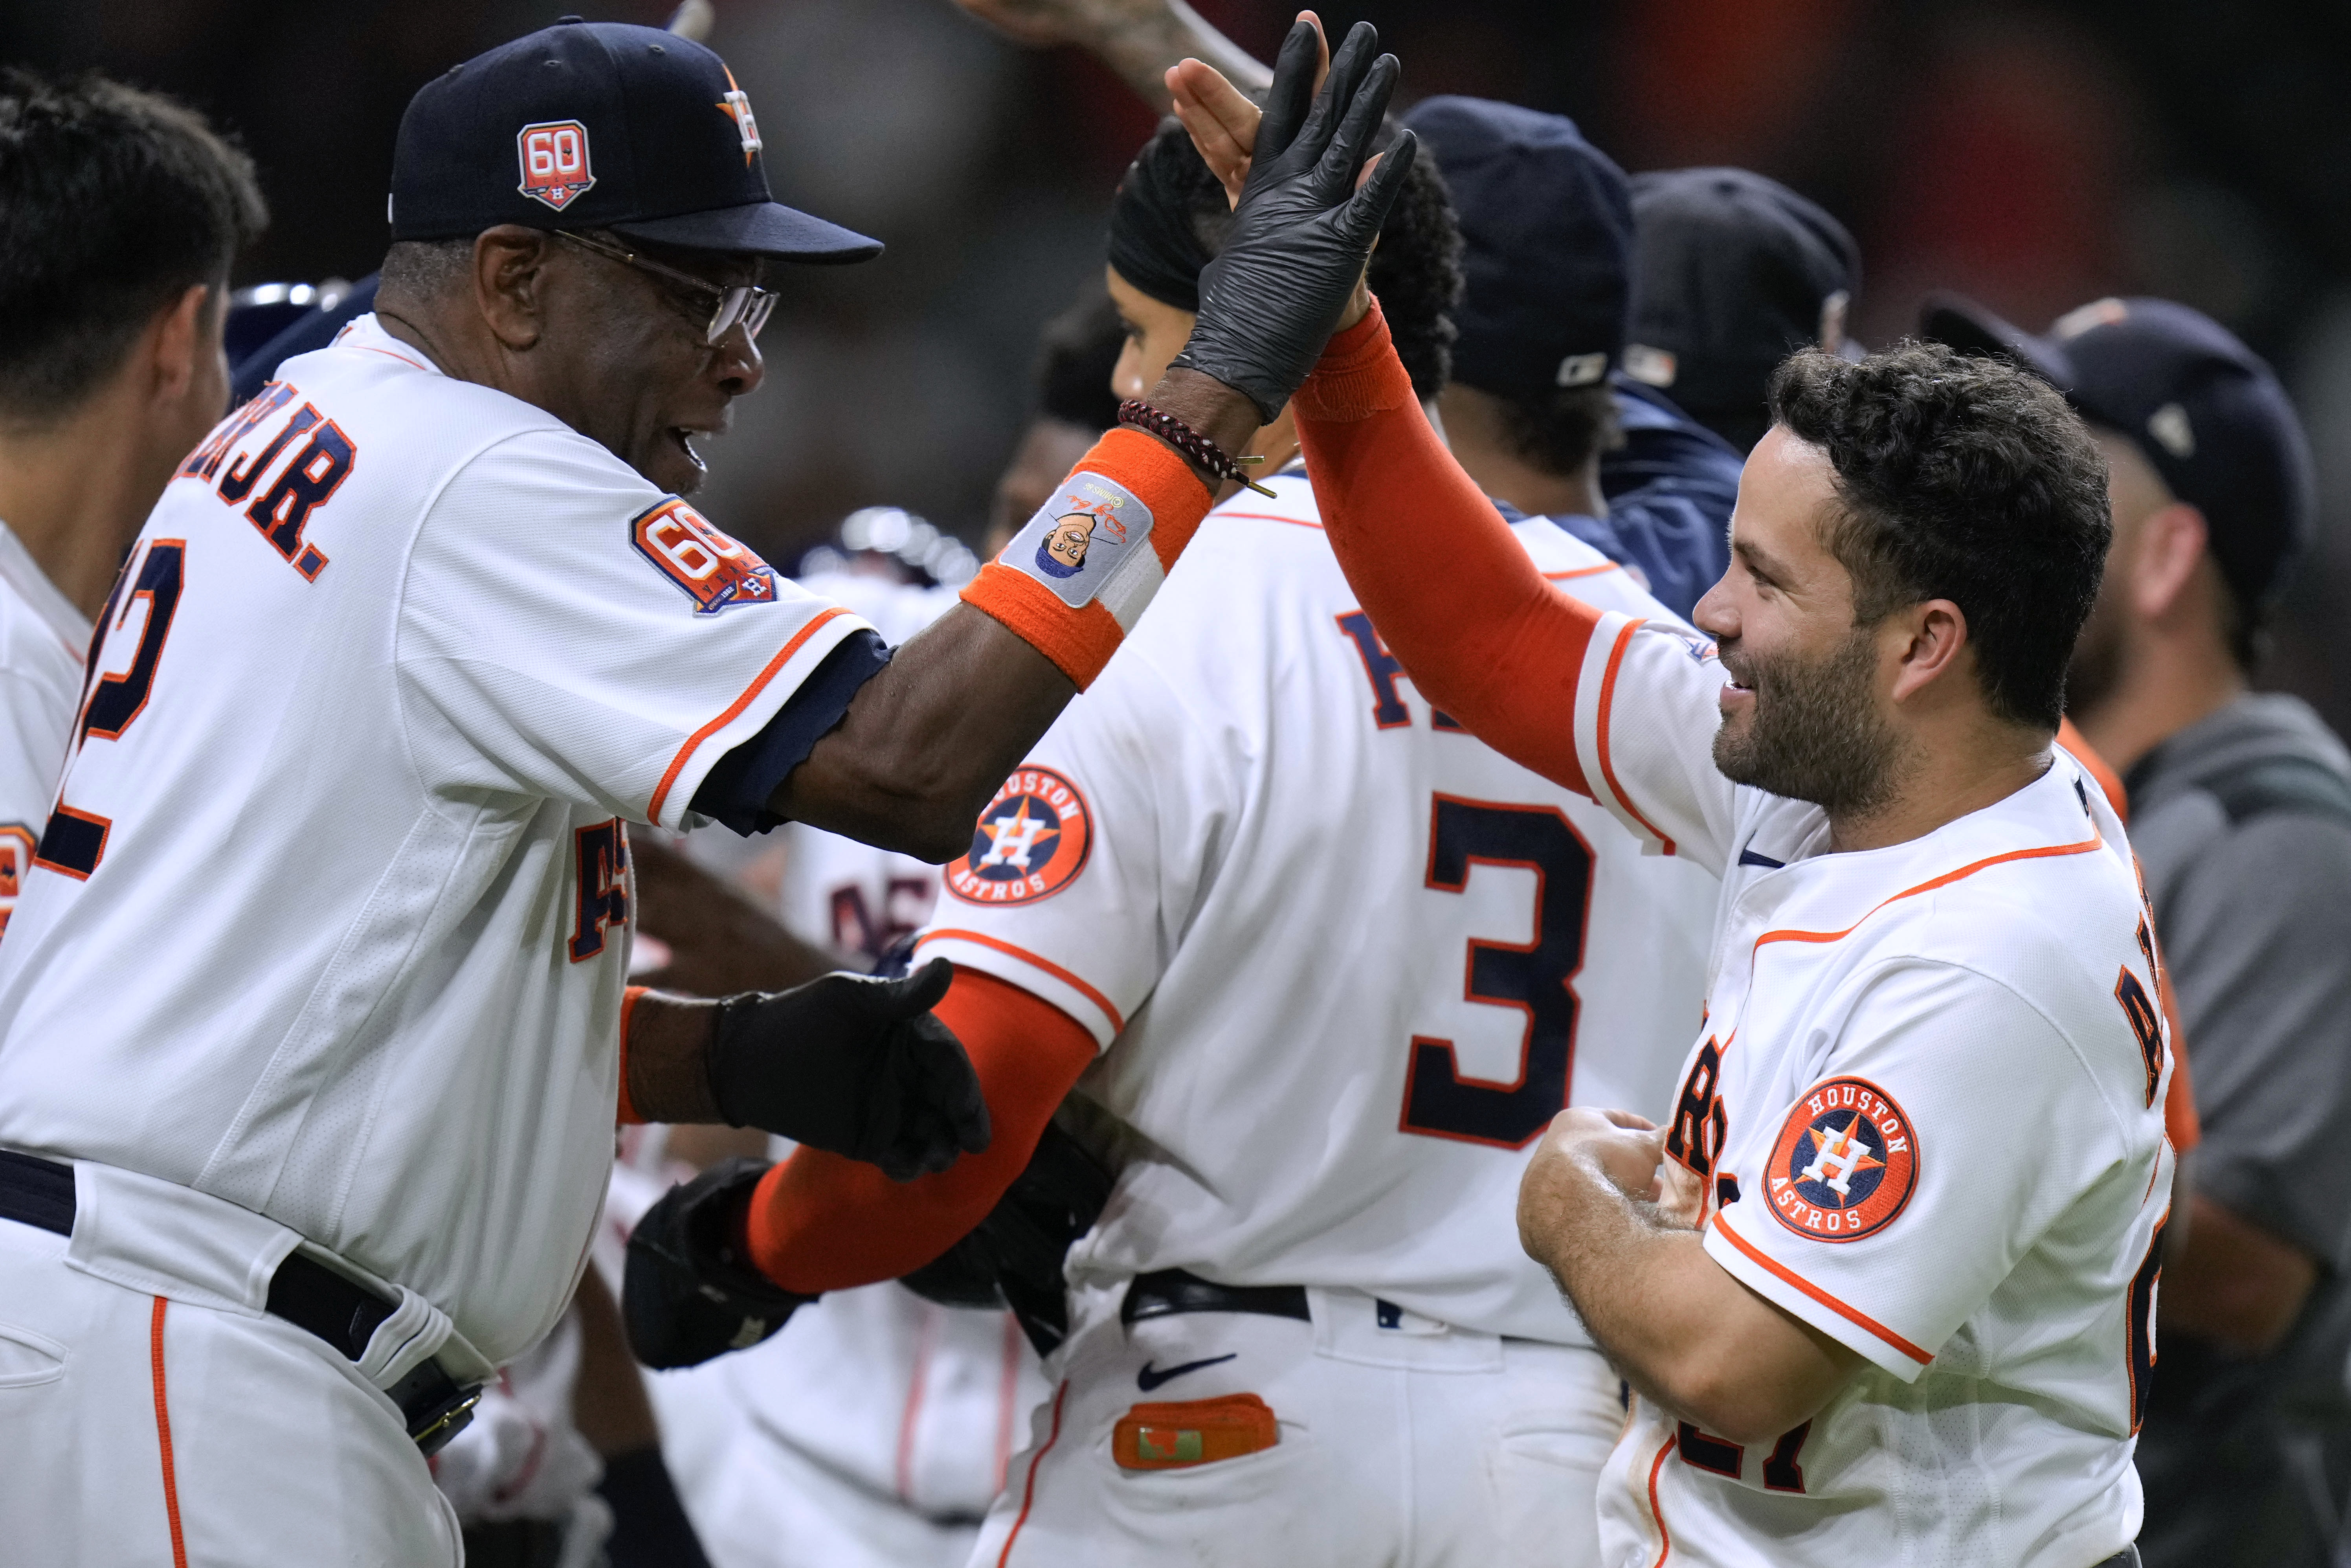 Jose Altuve looks 'game ready.' A struggling Astros offense needs